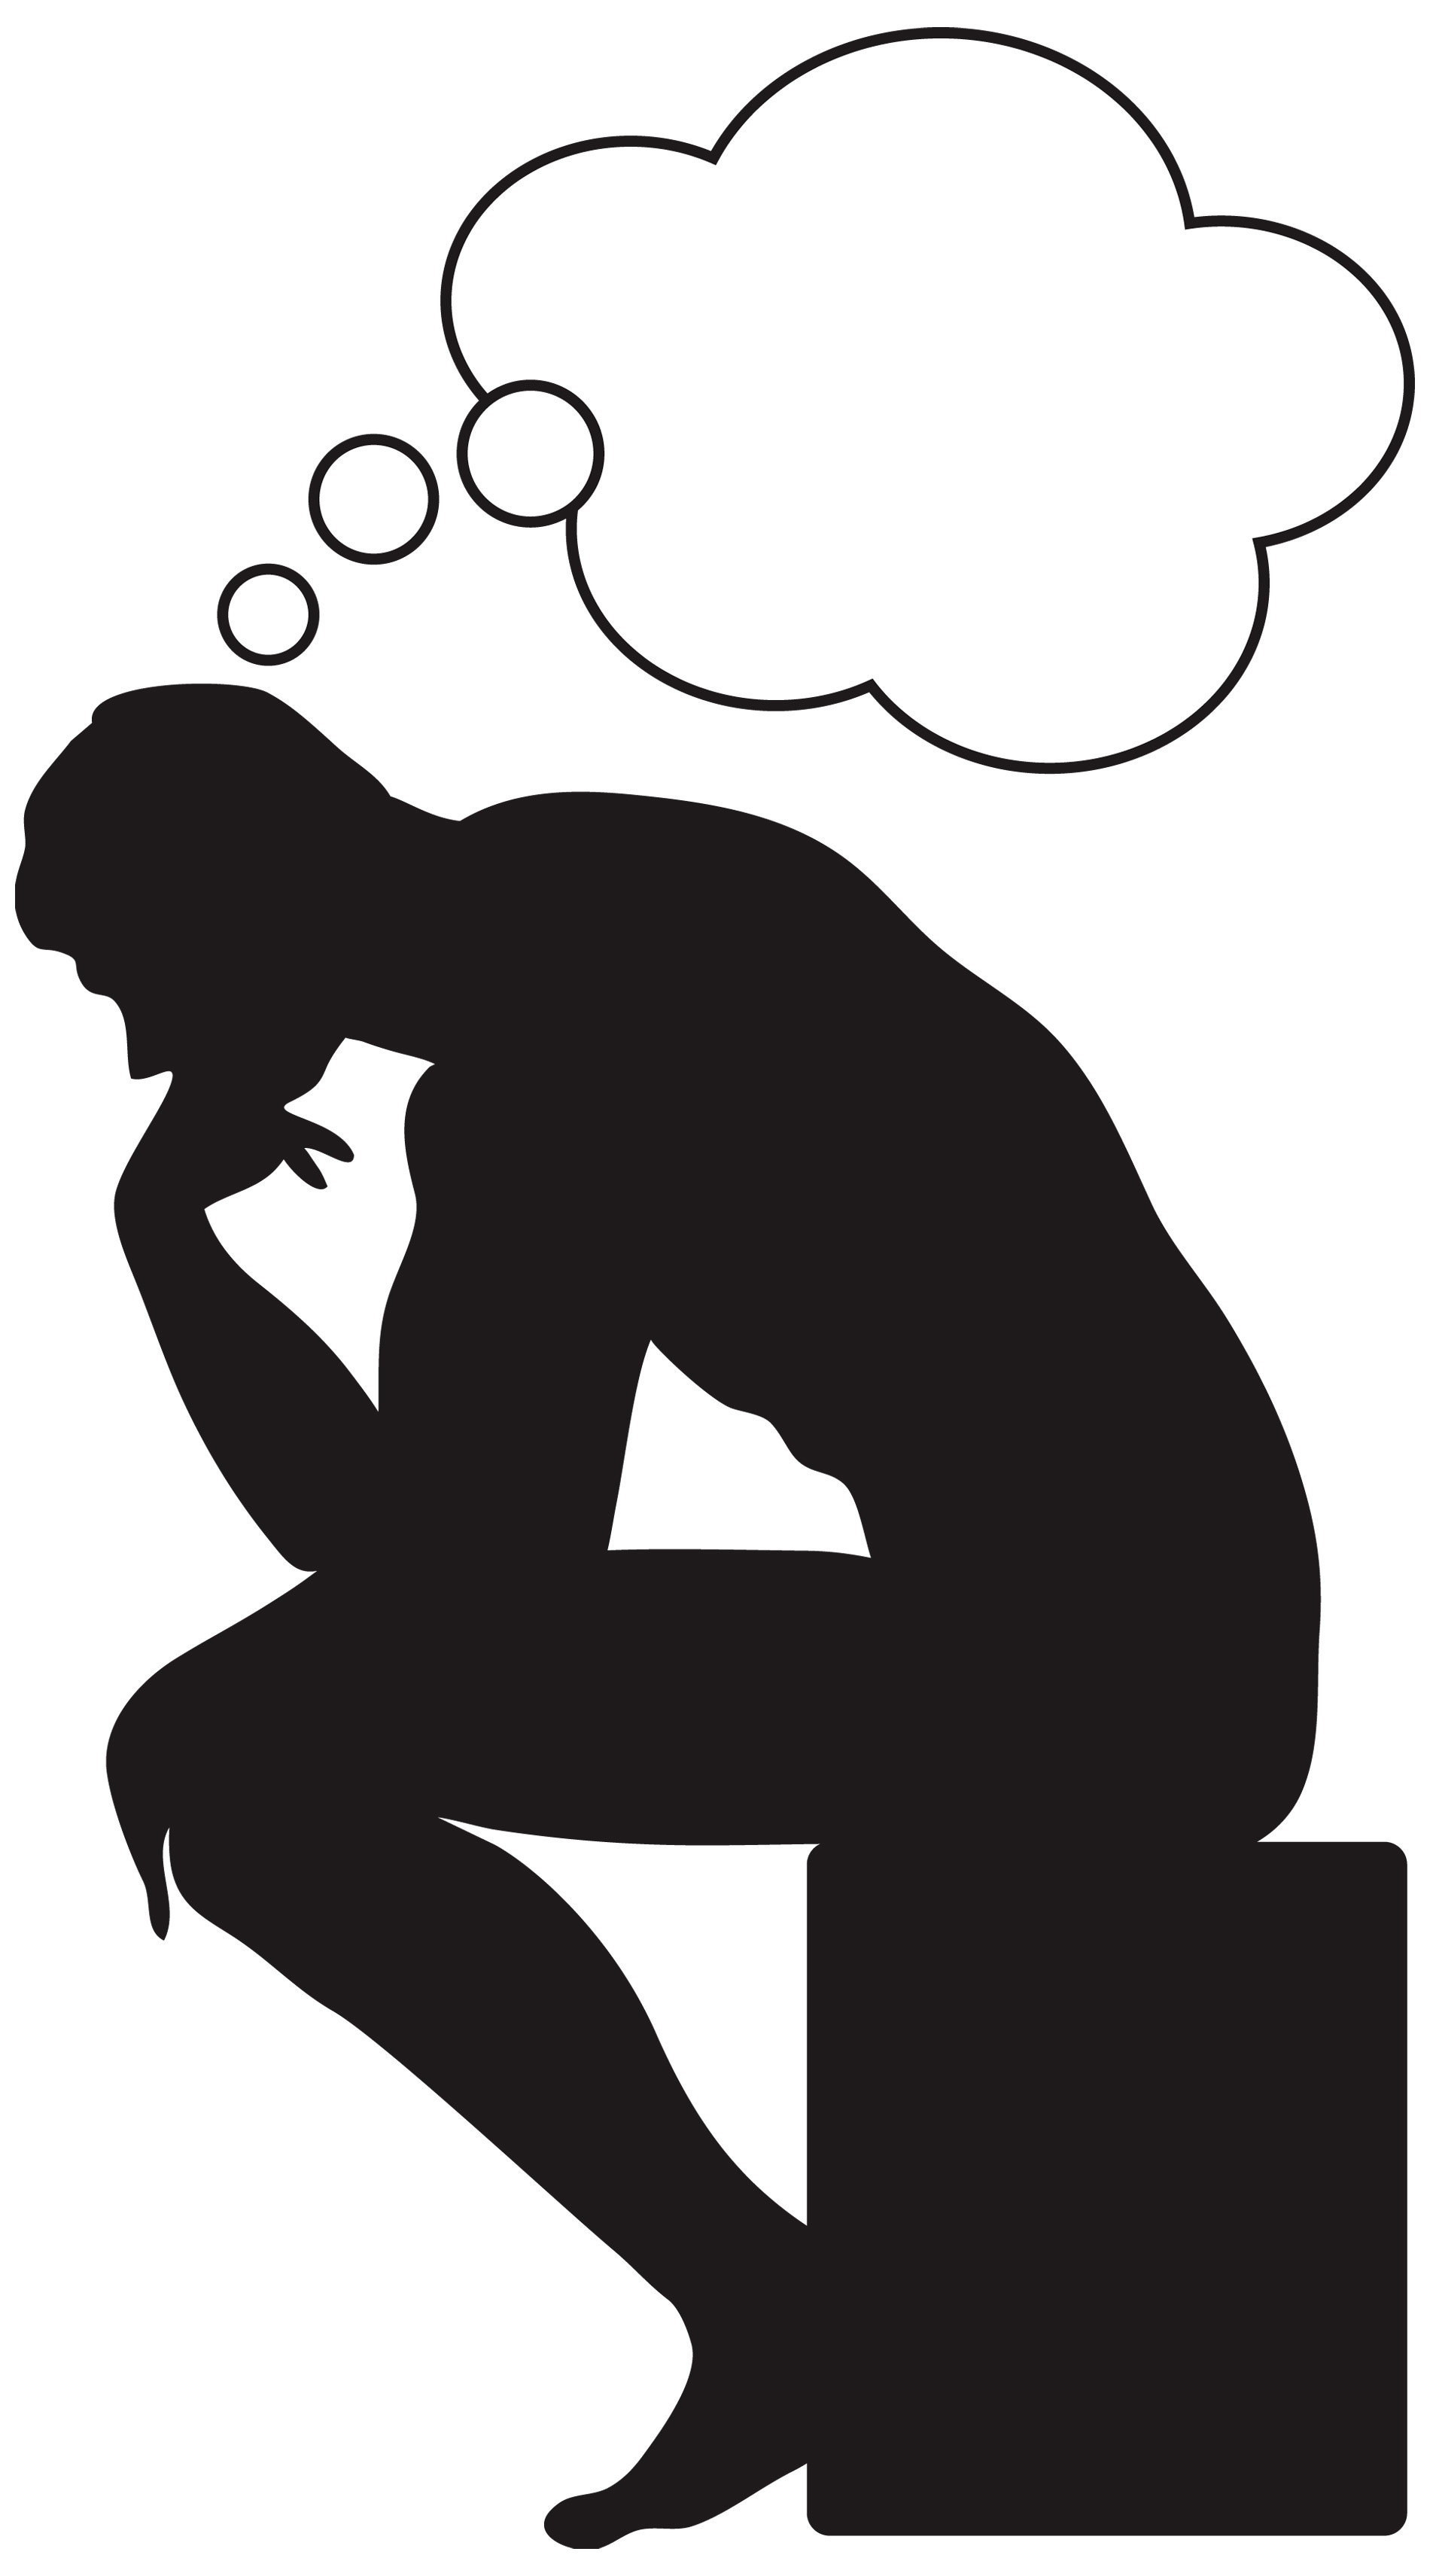 Free Thinking Man Cliparts, Download Free Clip Art, Free.